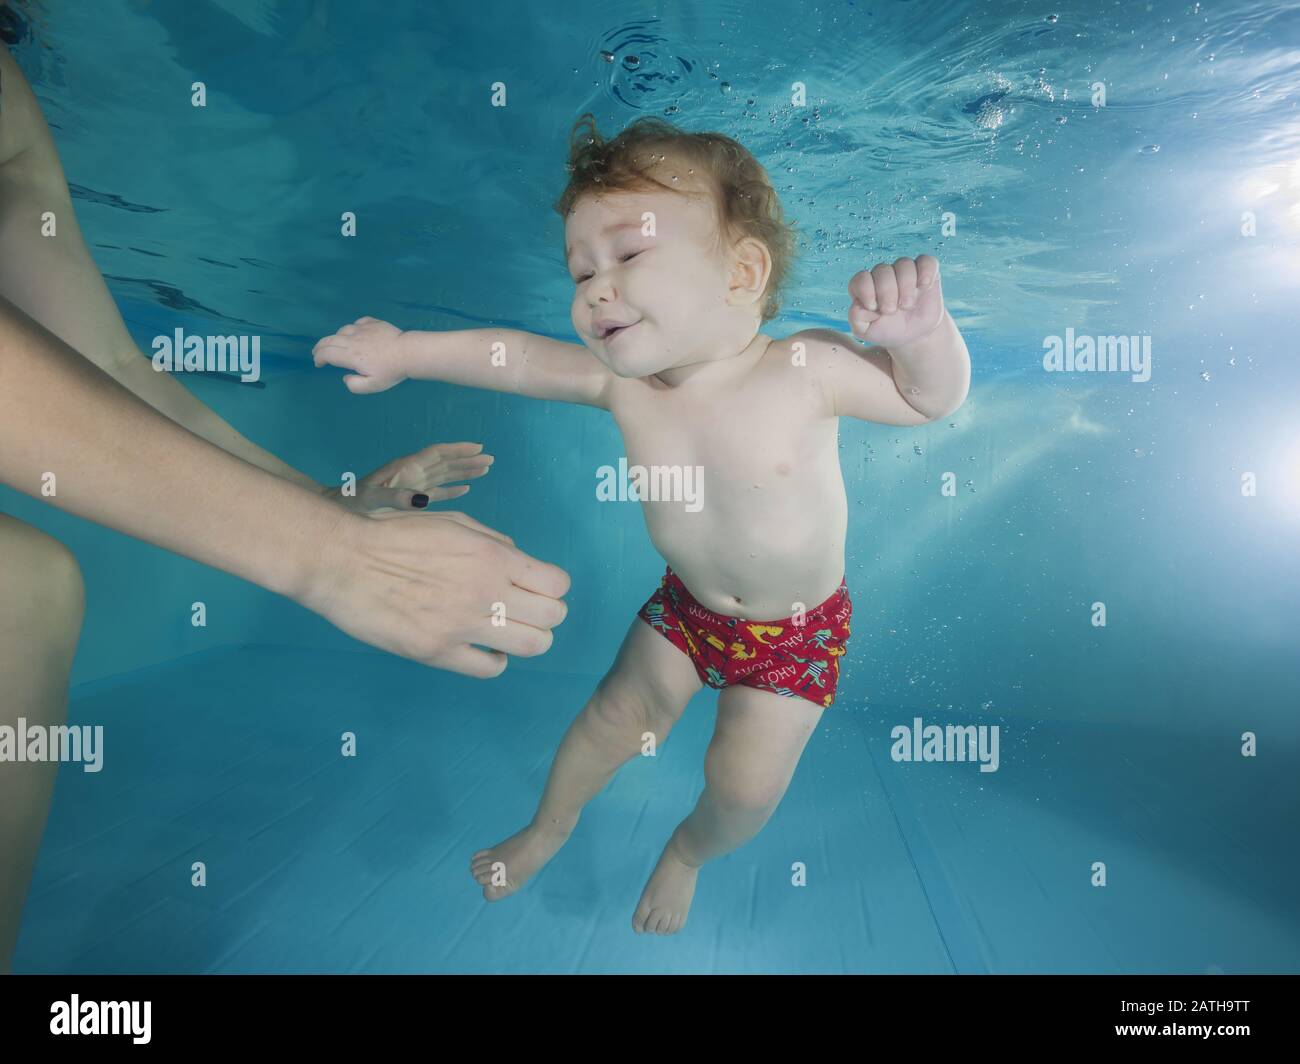 Funny red-haired boy plays underwater in a swimming pool, mother holding the child. Stock Photo